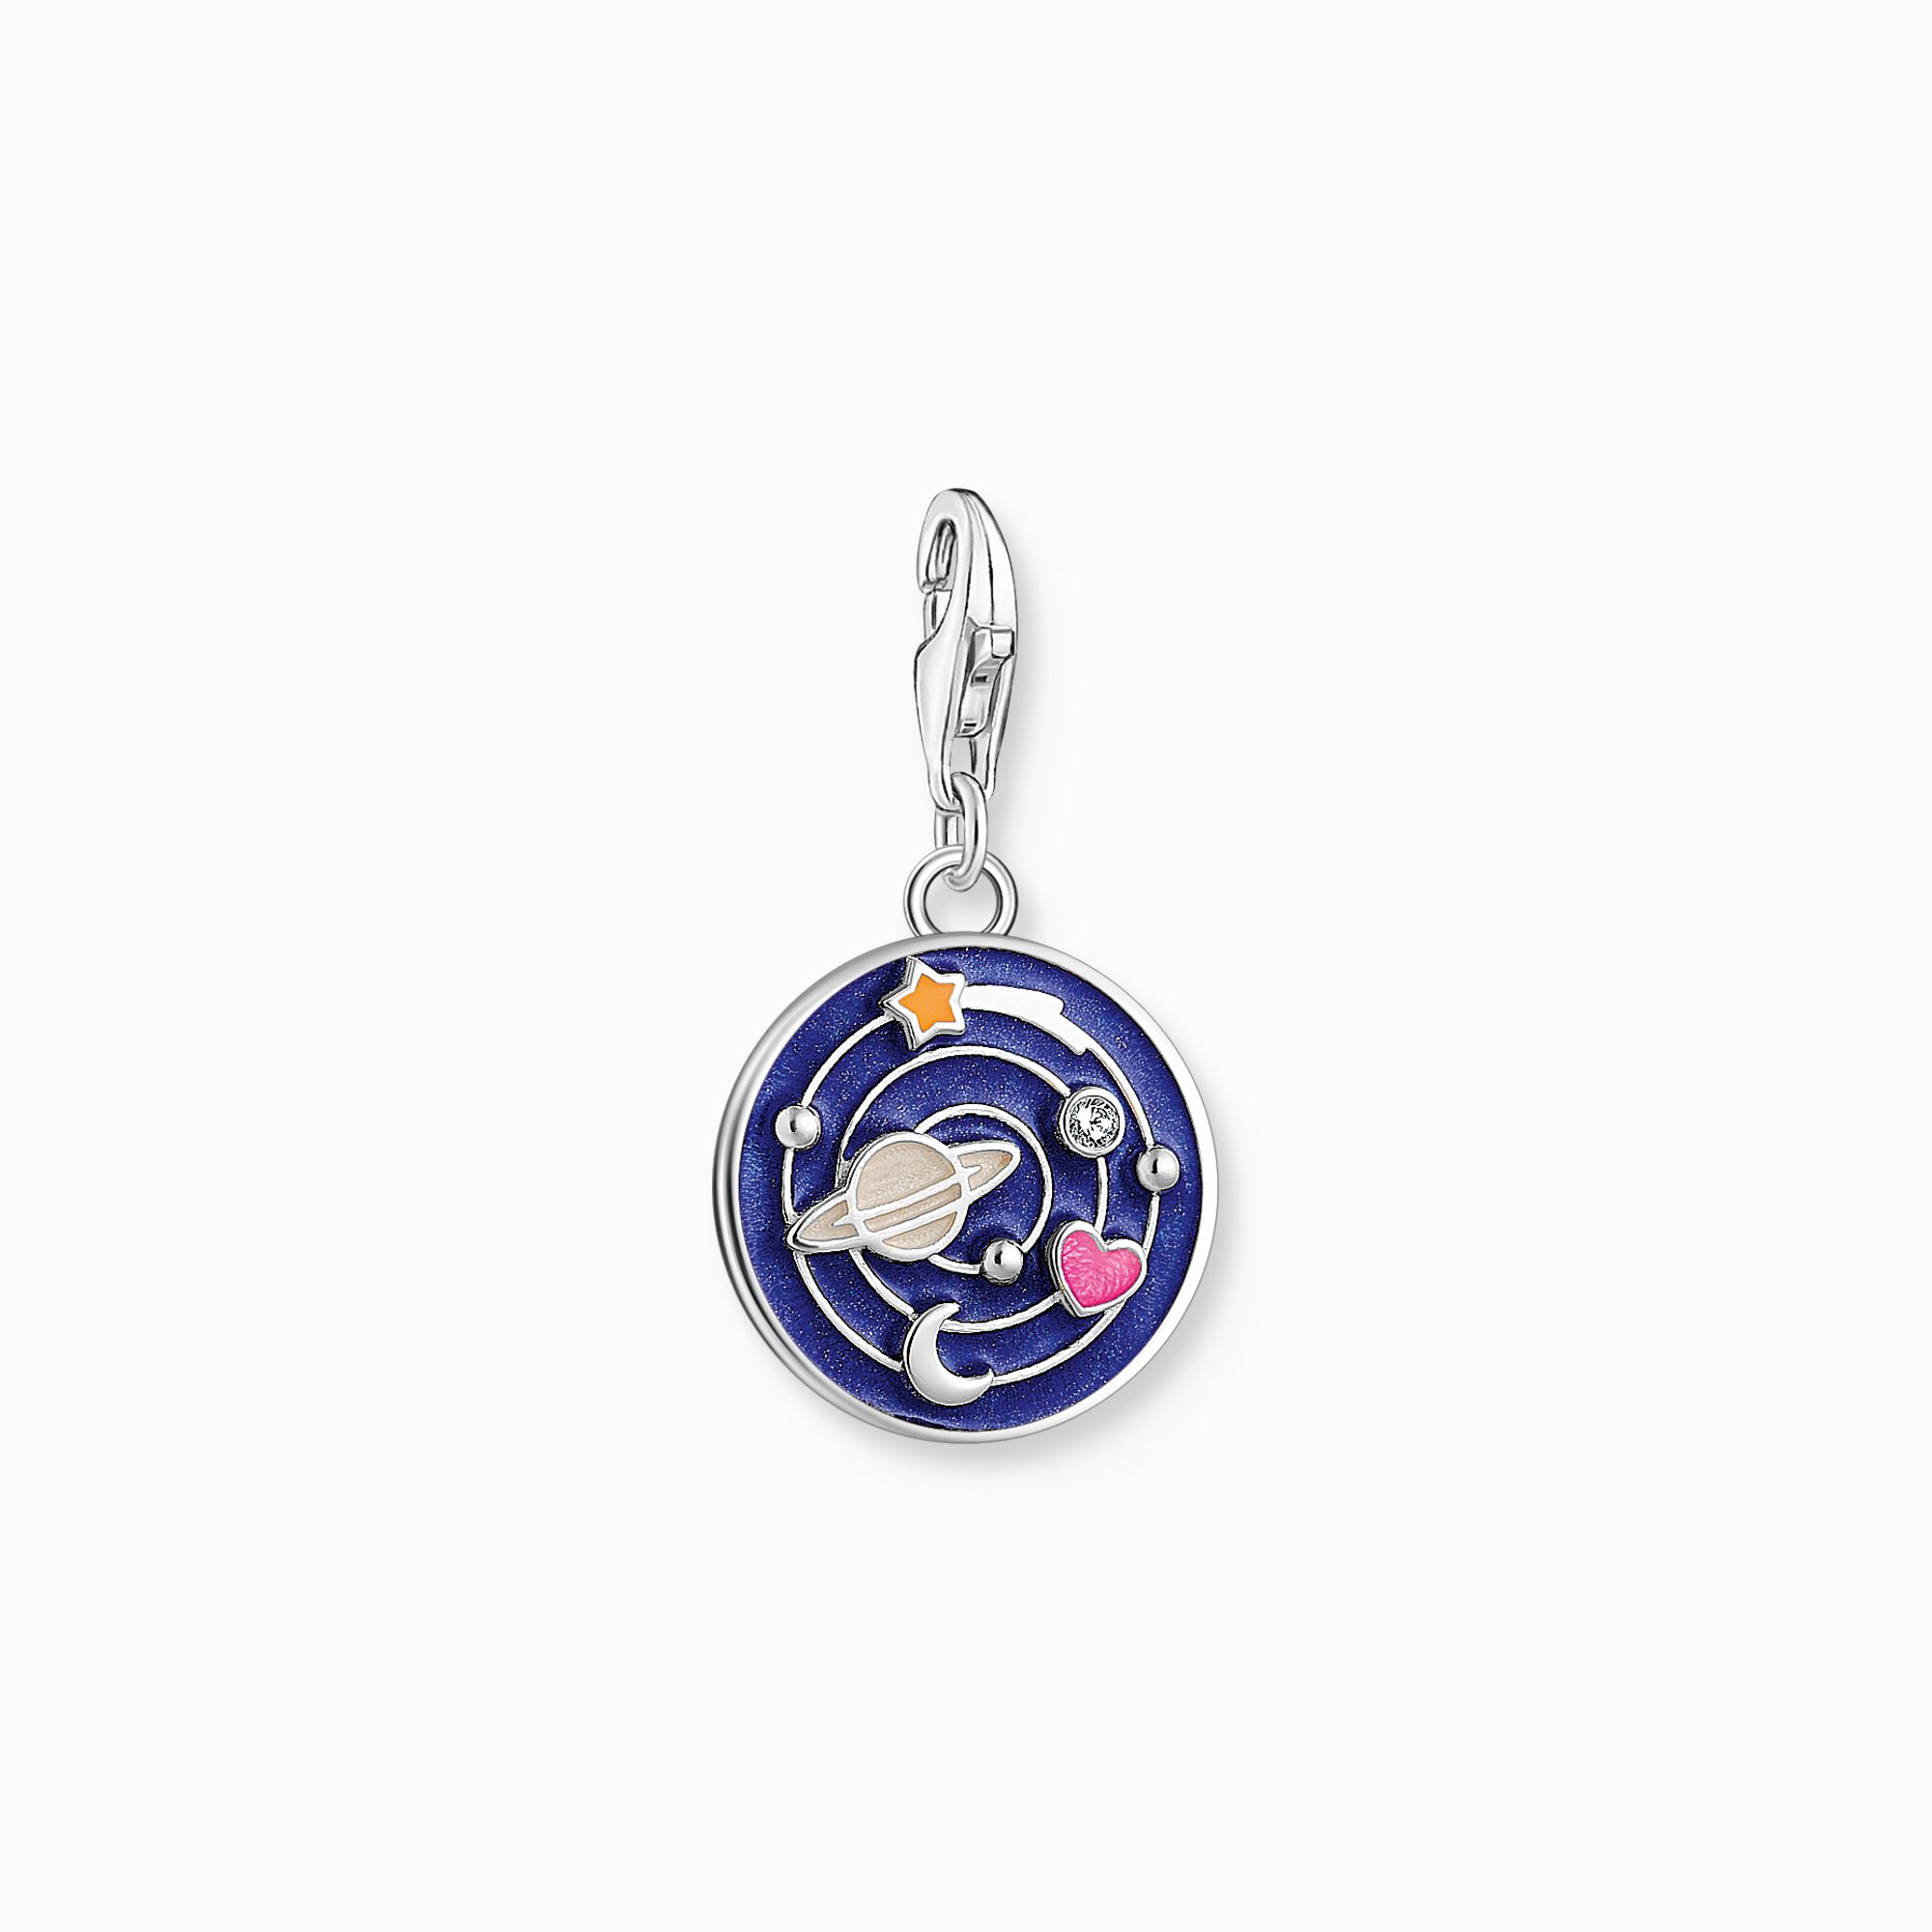 Charm pendant galaxy with cold enamel in various colours silver blackened from the Charm Club collection in the THOMAS SABO online store